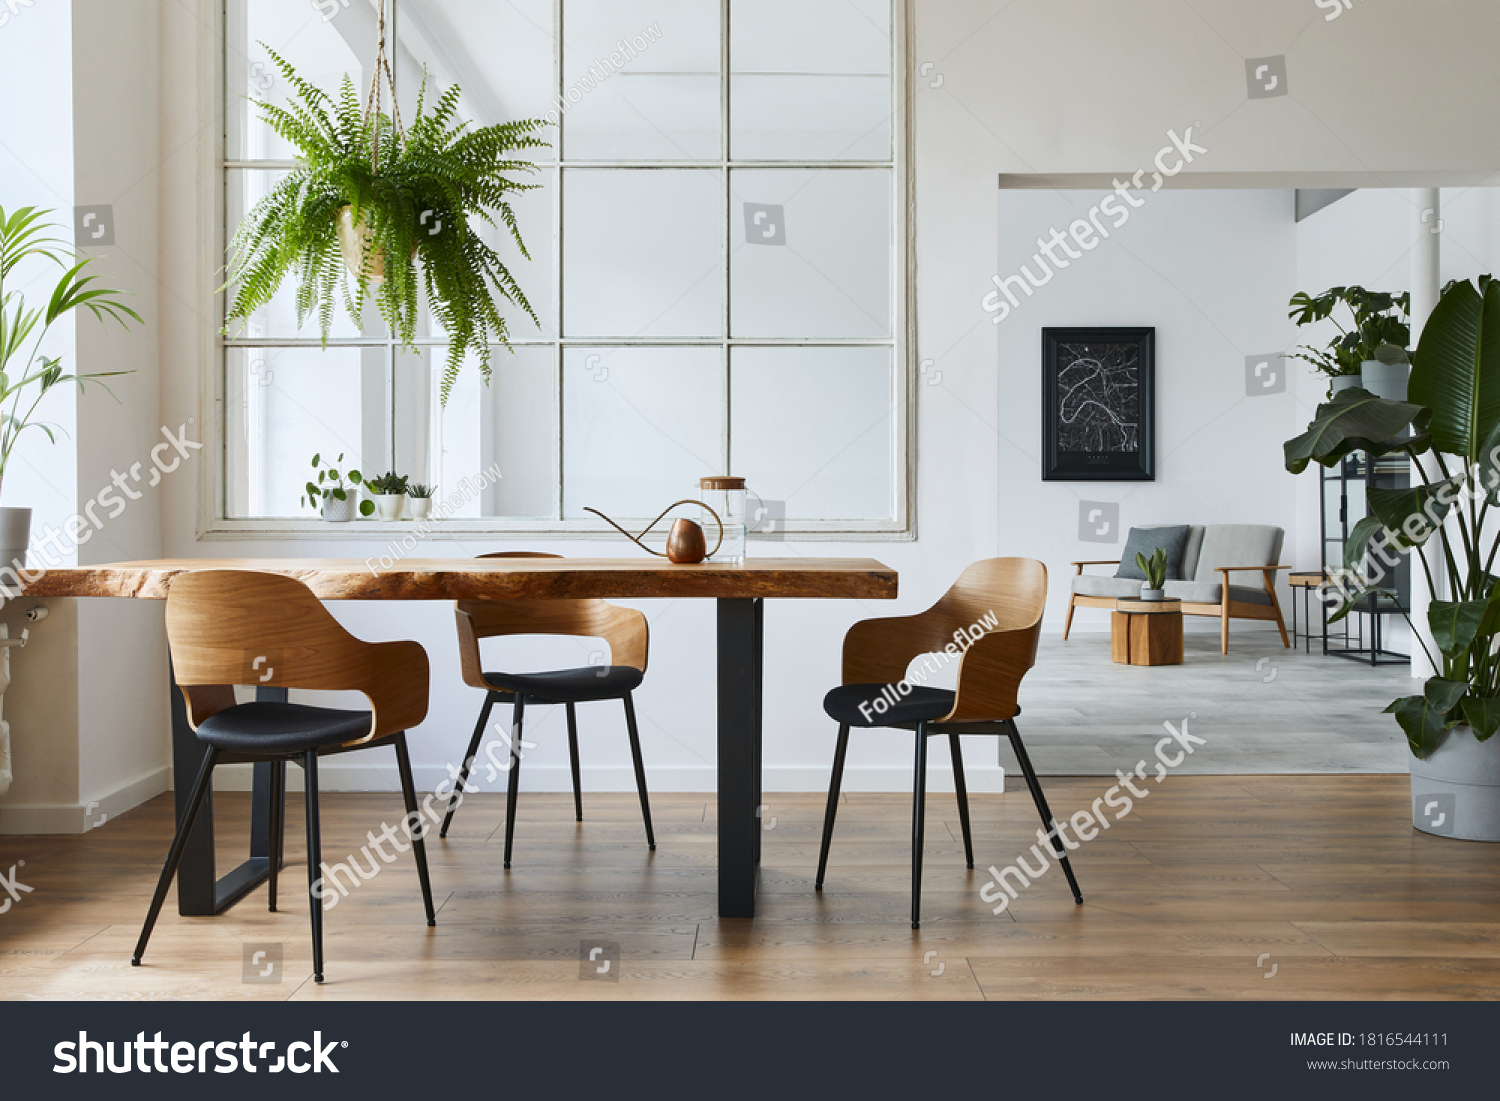 Stylish and botany interior of dining room with design craft wooden table, chairs, a lof of plants, window, poster map and elegant accessories in modern home decor. Template. #1816544111